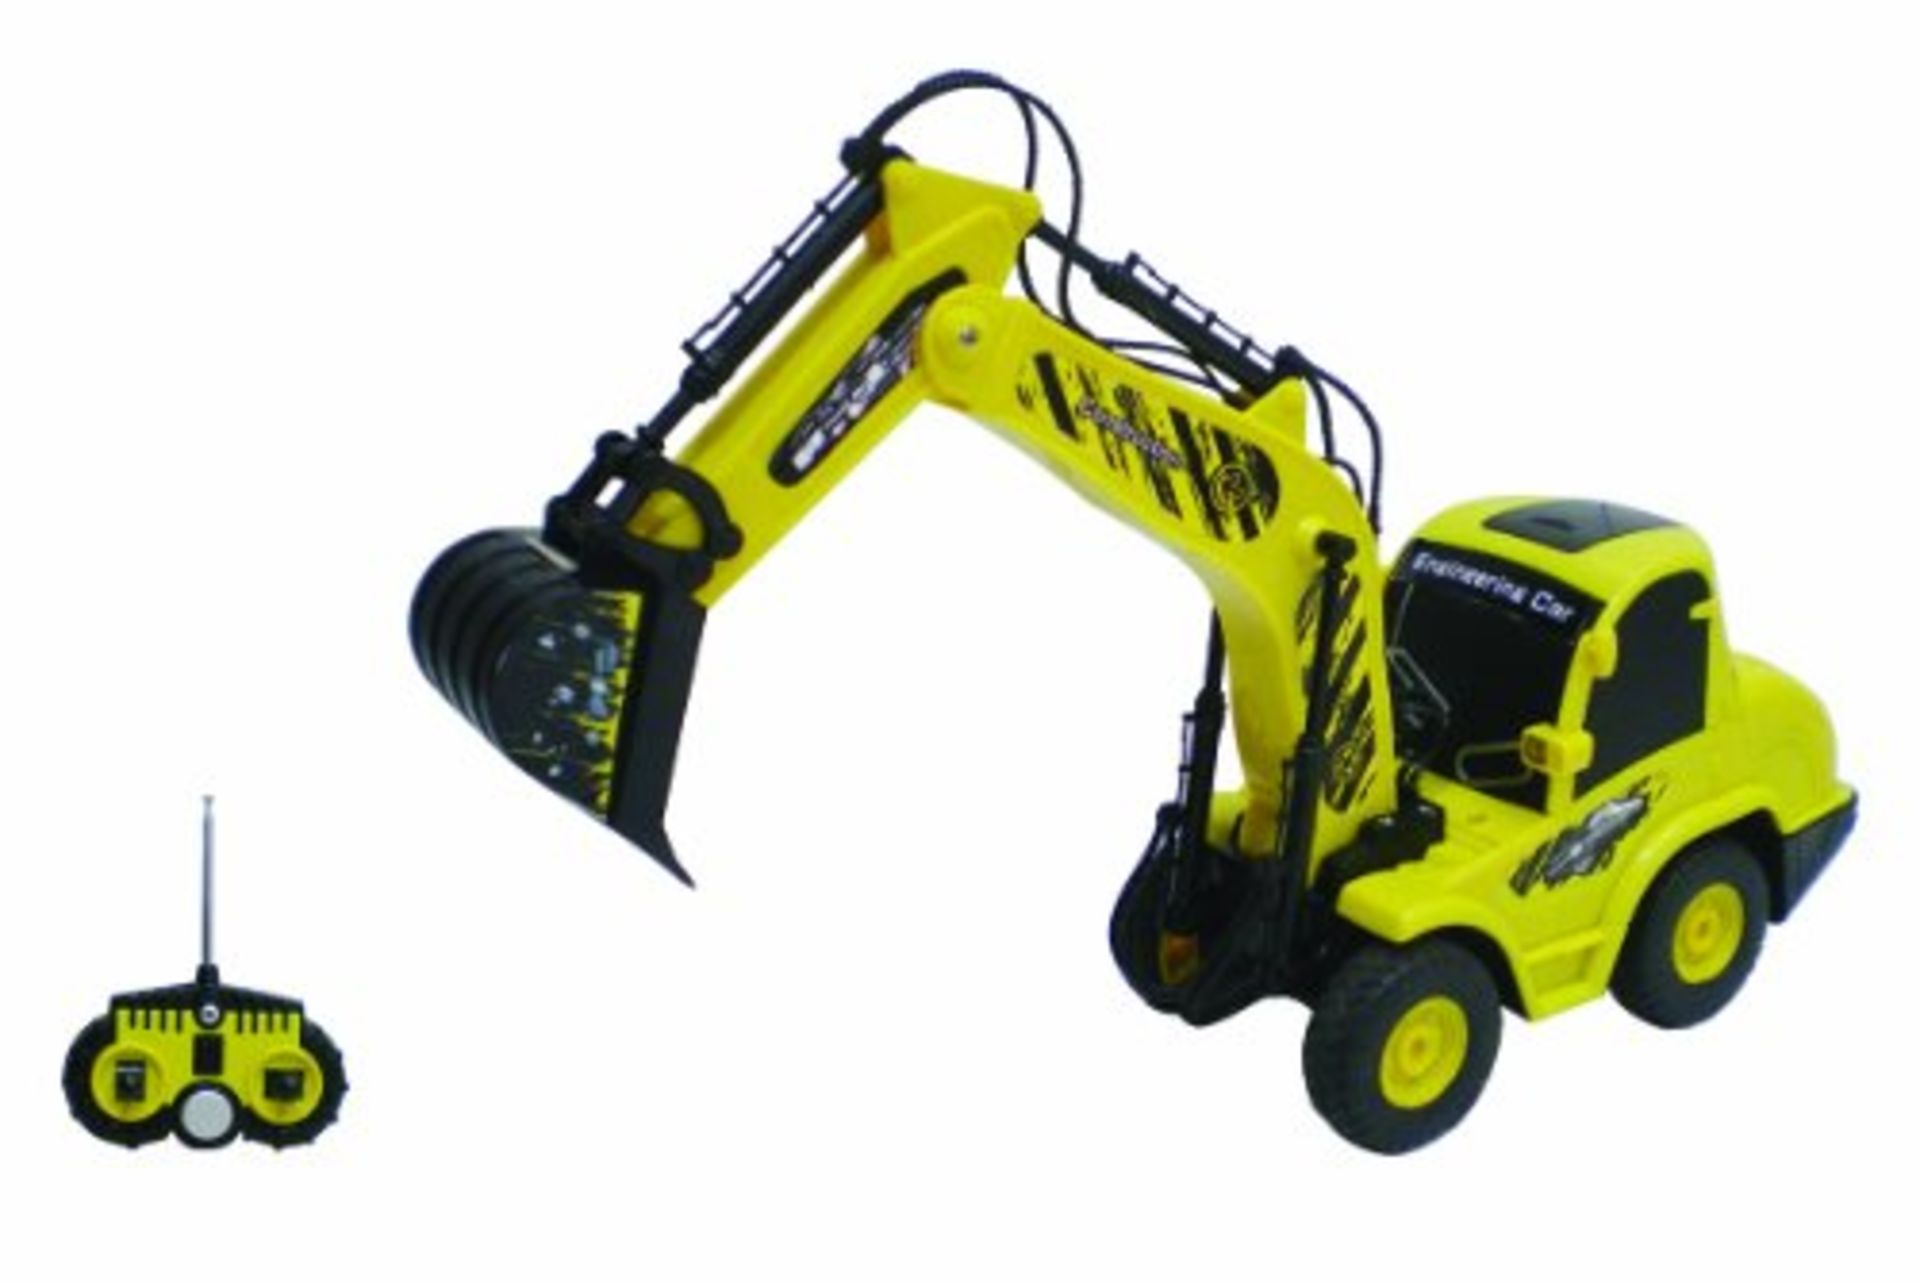 V Brand New Yellow 1:20 Radio Controlled Construction Vehicle (Reach Arm) X 2 YOUR BID PRICE TO BE